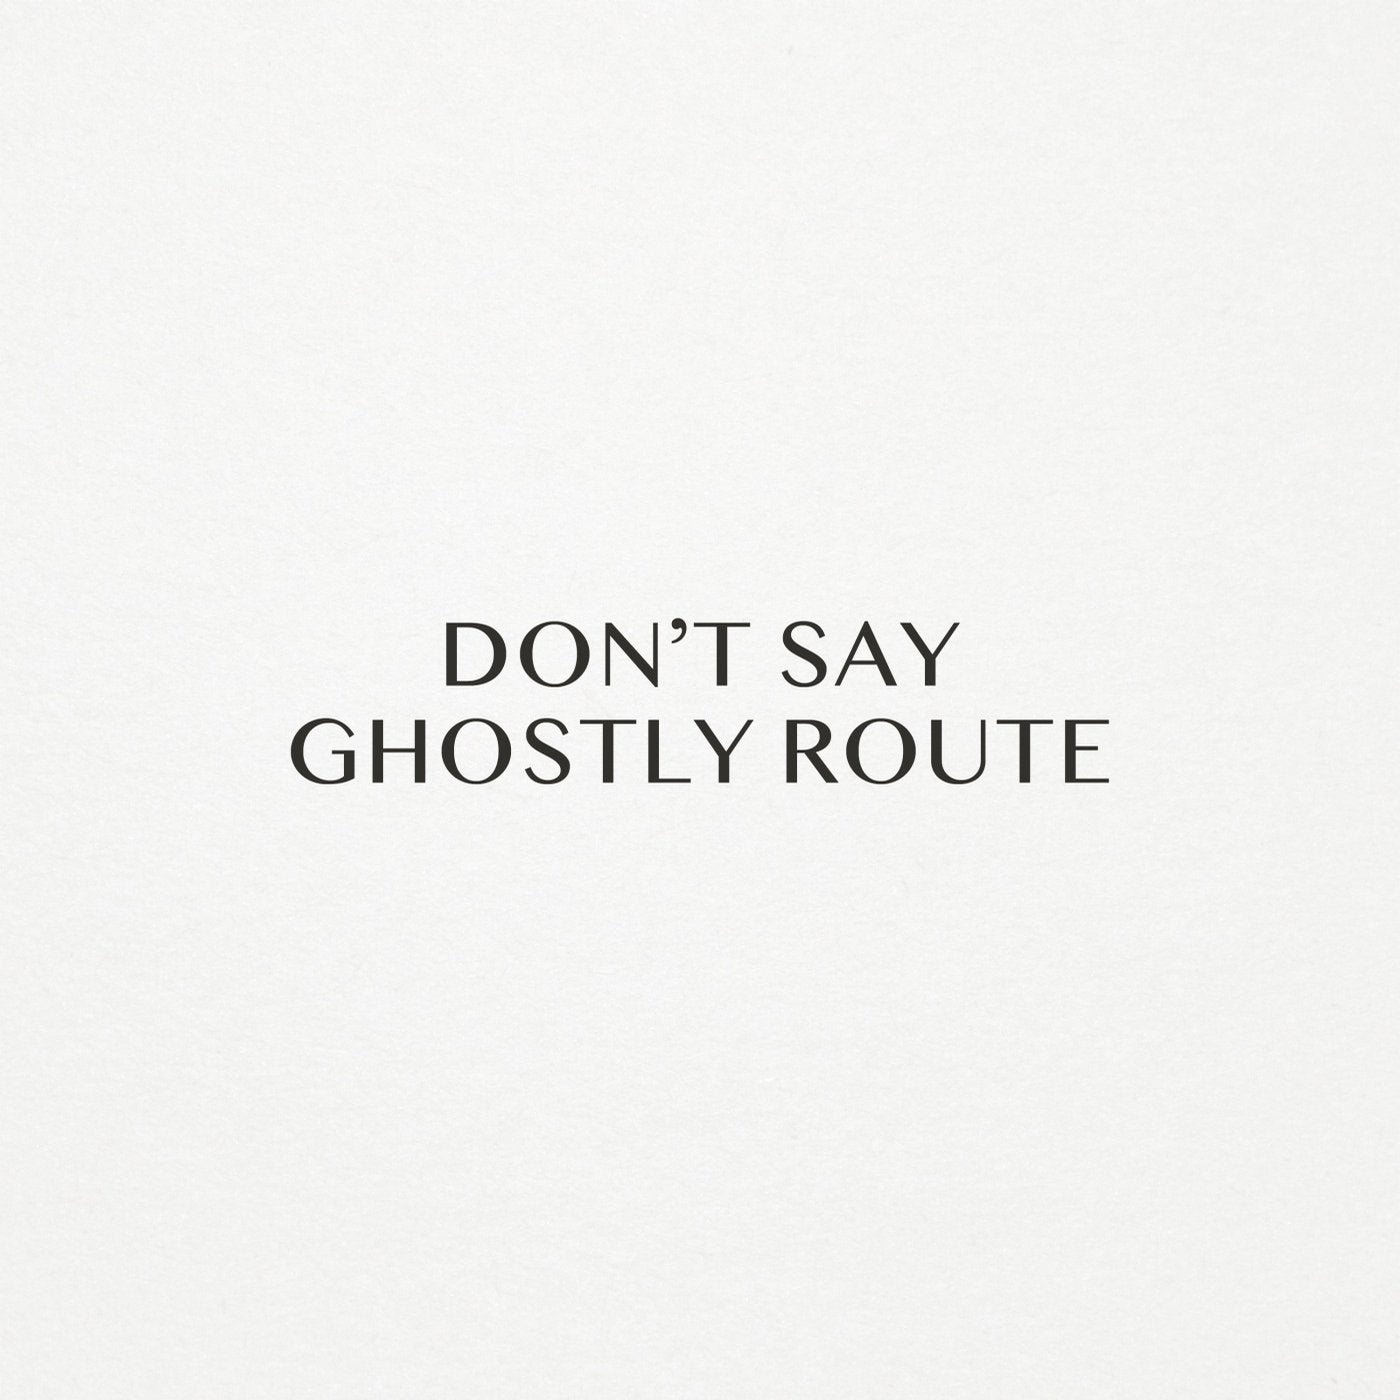 Ghostly Route